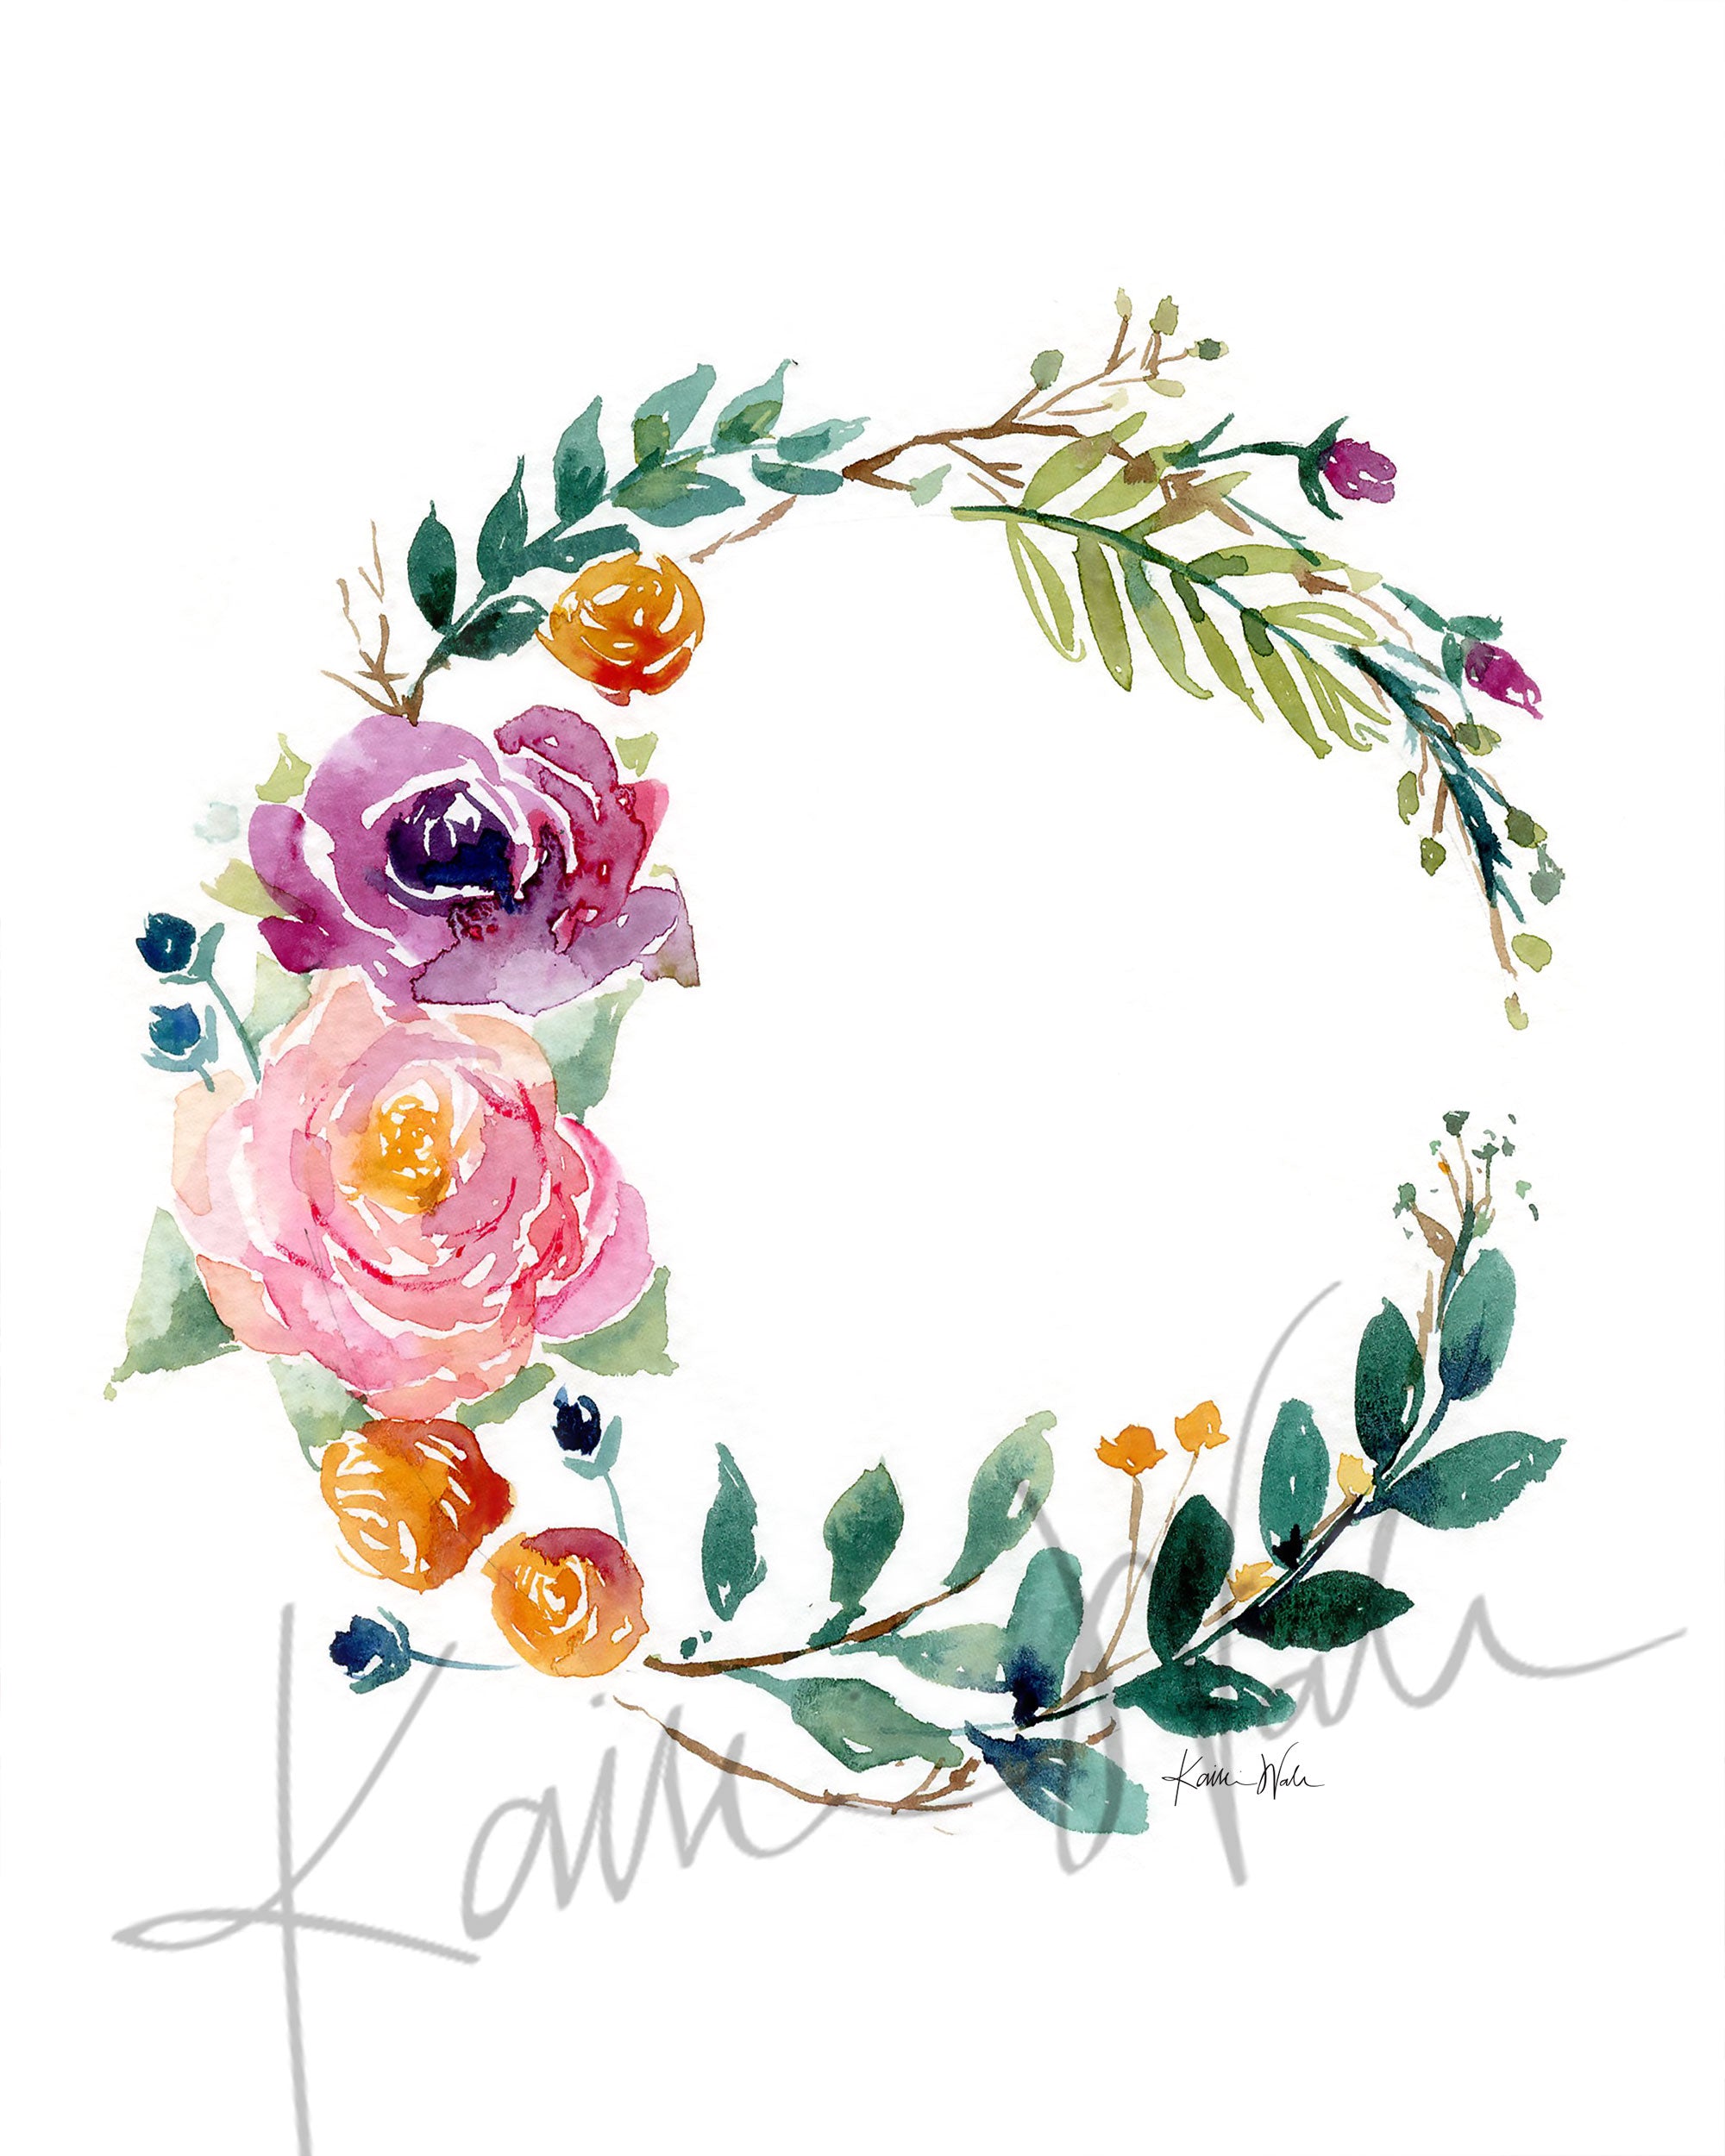 Unframed watercolor painting of a flower wreath.